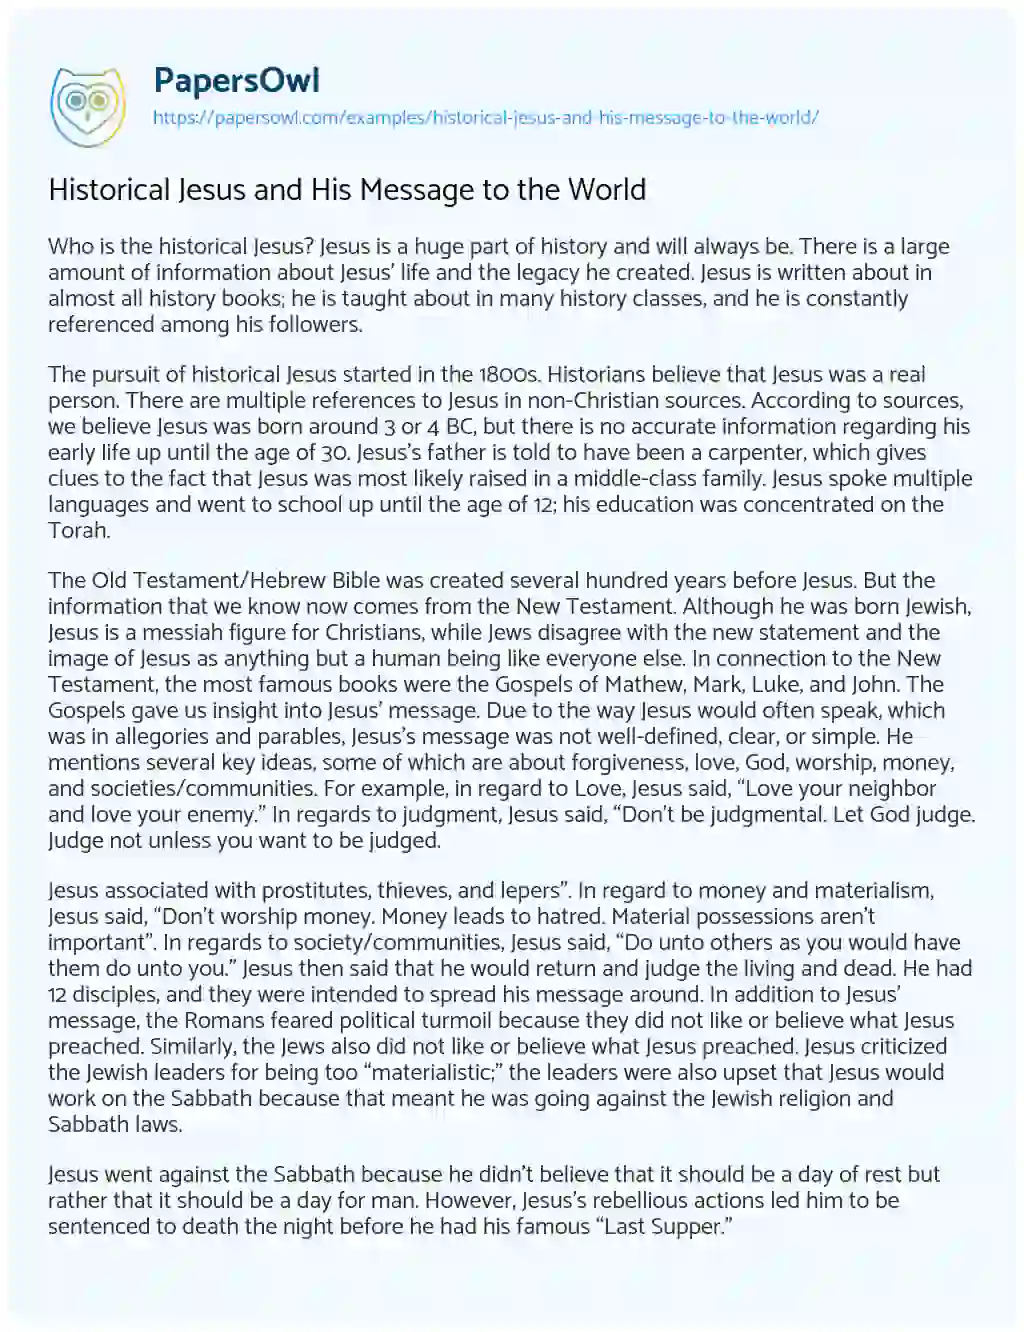 Essay on Historical Jesus and his Message to the World